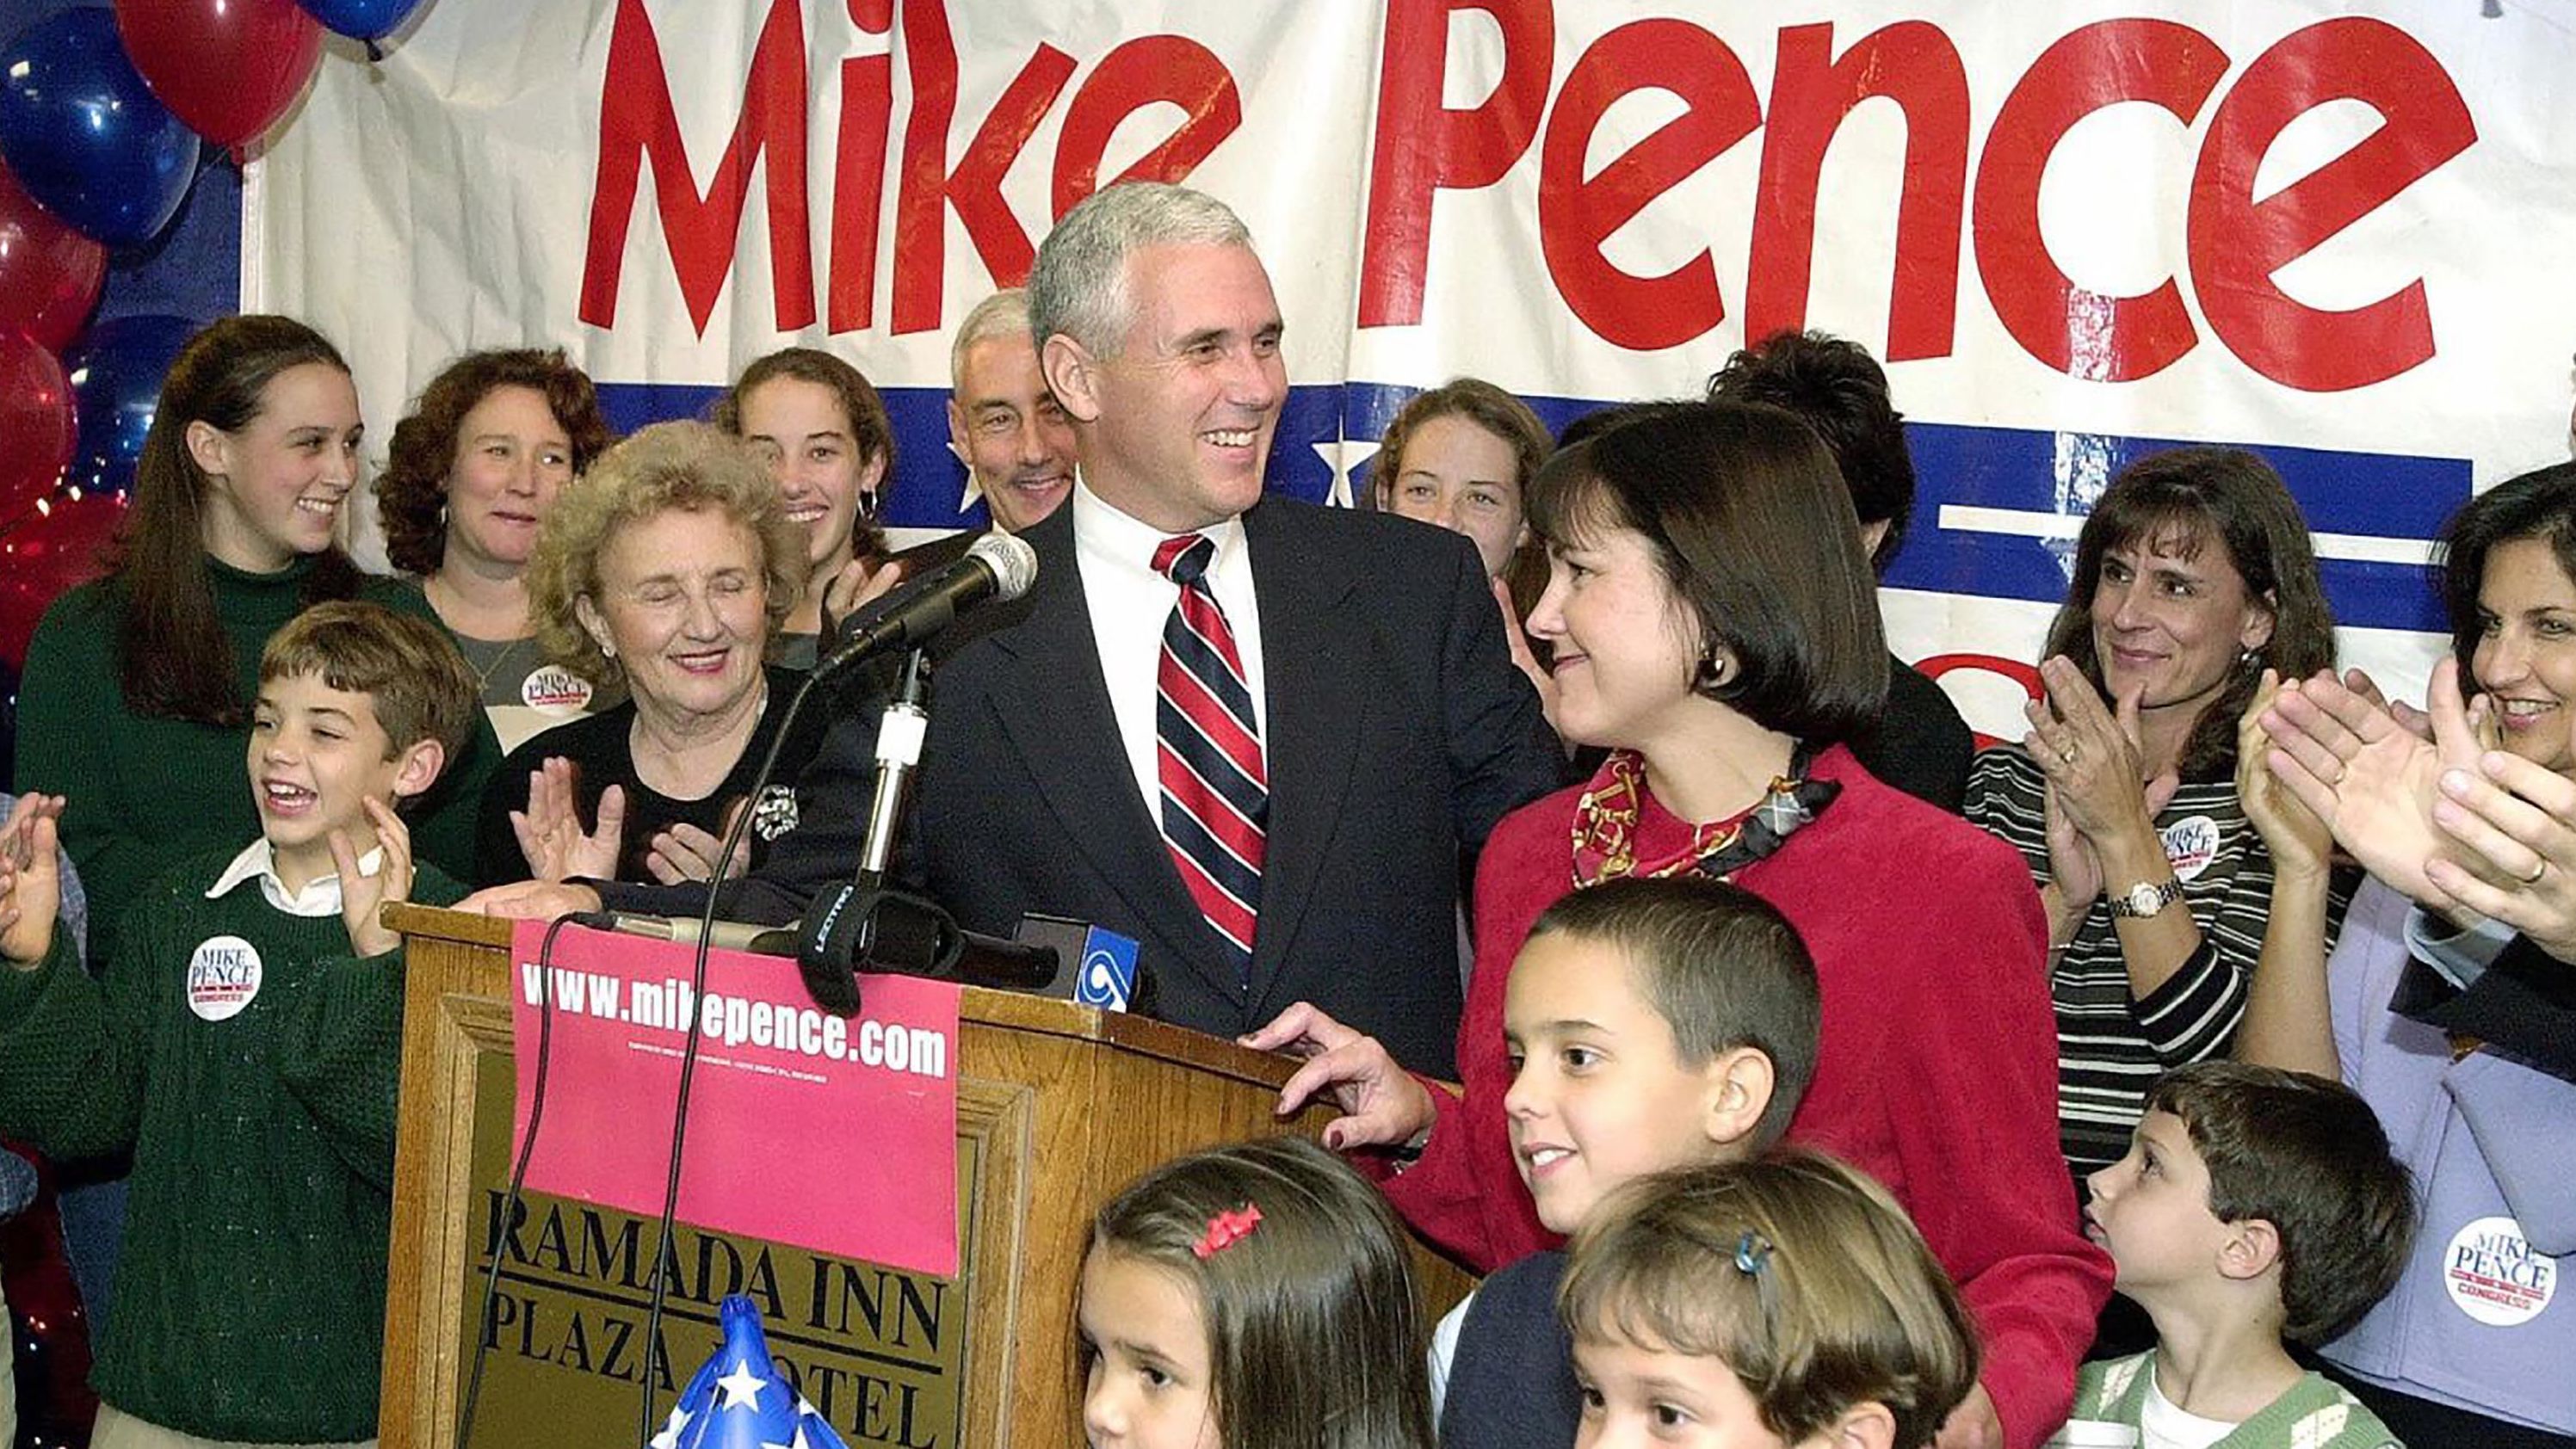 Pence is joined by his wife, Karen, and other family members after winning a congressional race in 2000.